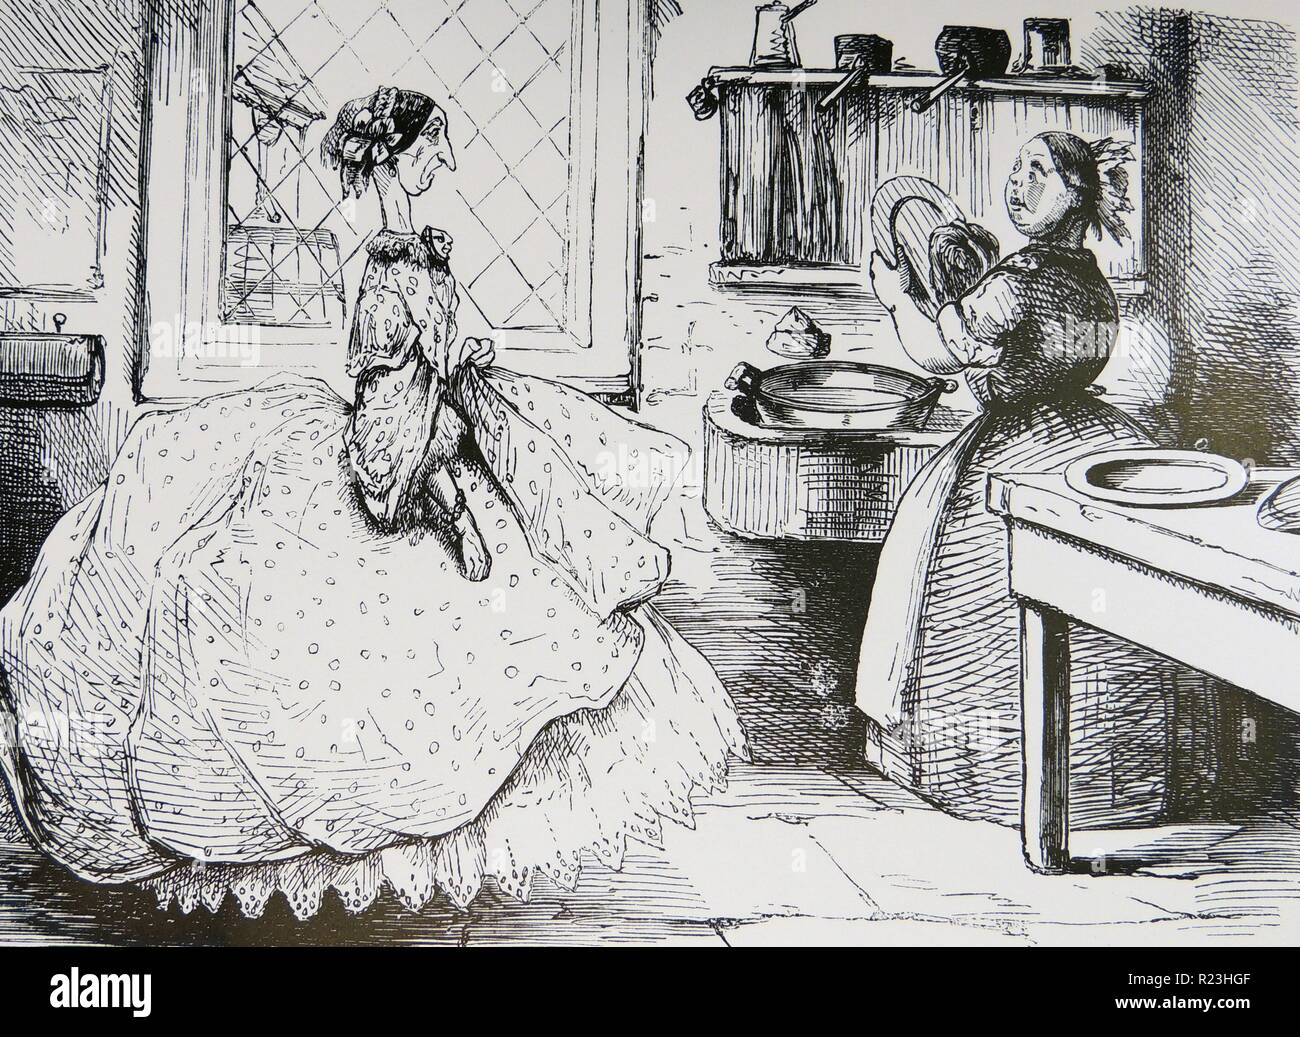 The servant problem: Housewife visits the kitchen to complain to her 'Good Plain Cook' about caterpillars in vegetables. Cook has a cheeky answer for everything. Cartoon from ''Punch'', London, 1860. Stock Photo